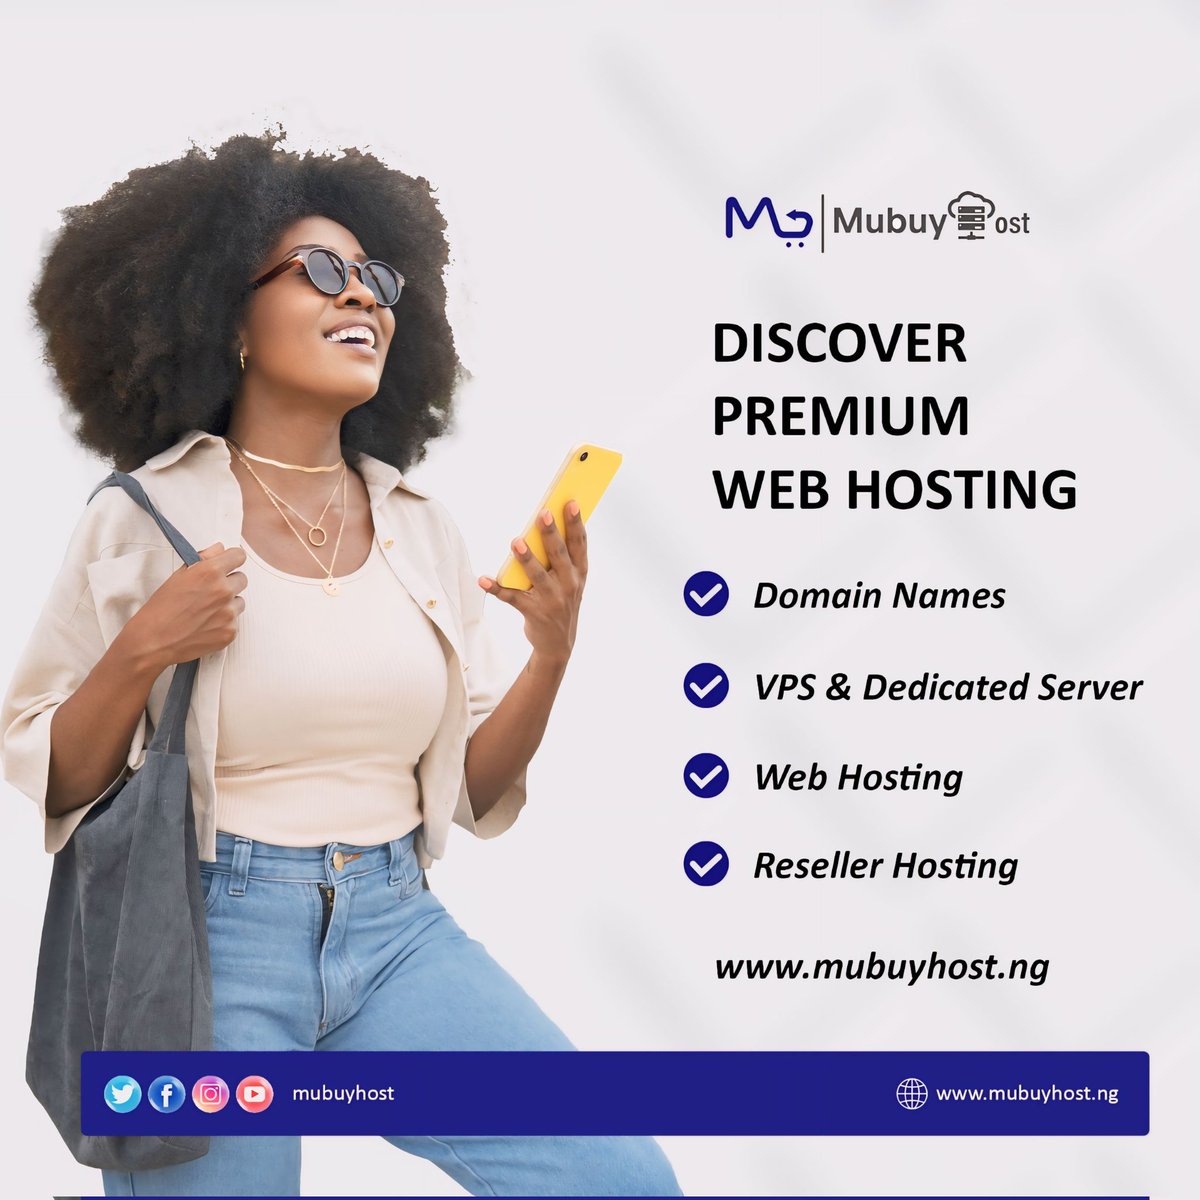 Take your website to the next level with MubuyHost's premium services. From domain names to dedicated servers, we provide reliable solutions for all your hosting needs. Visit mubuyhost.ng today!
#WebHosting #DomainNames #VPS #DedicatedServer #ResellerHosting #MubuyHost